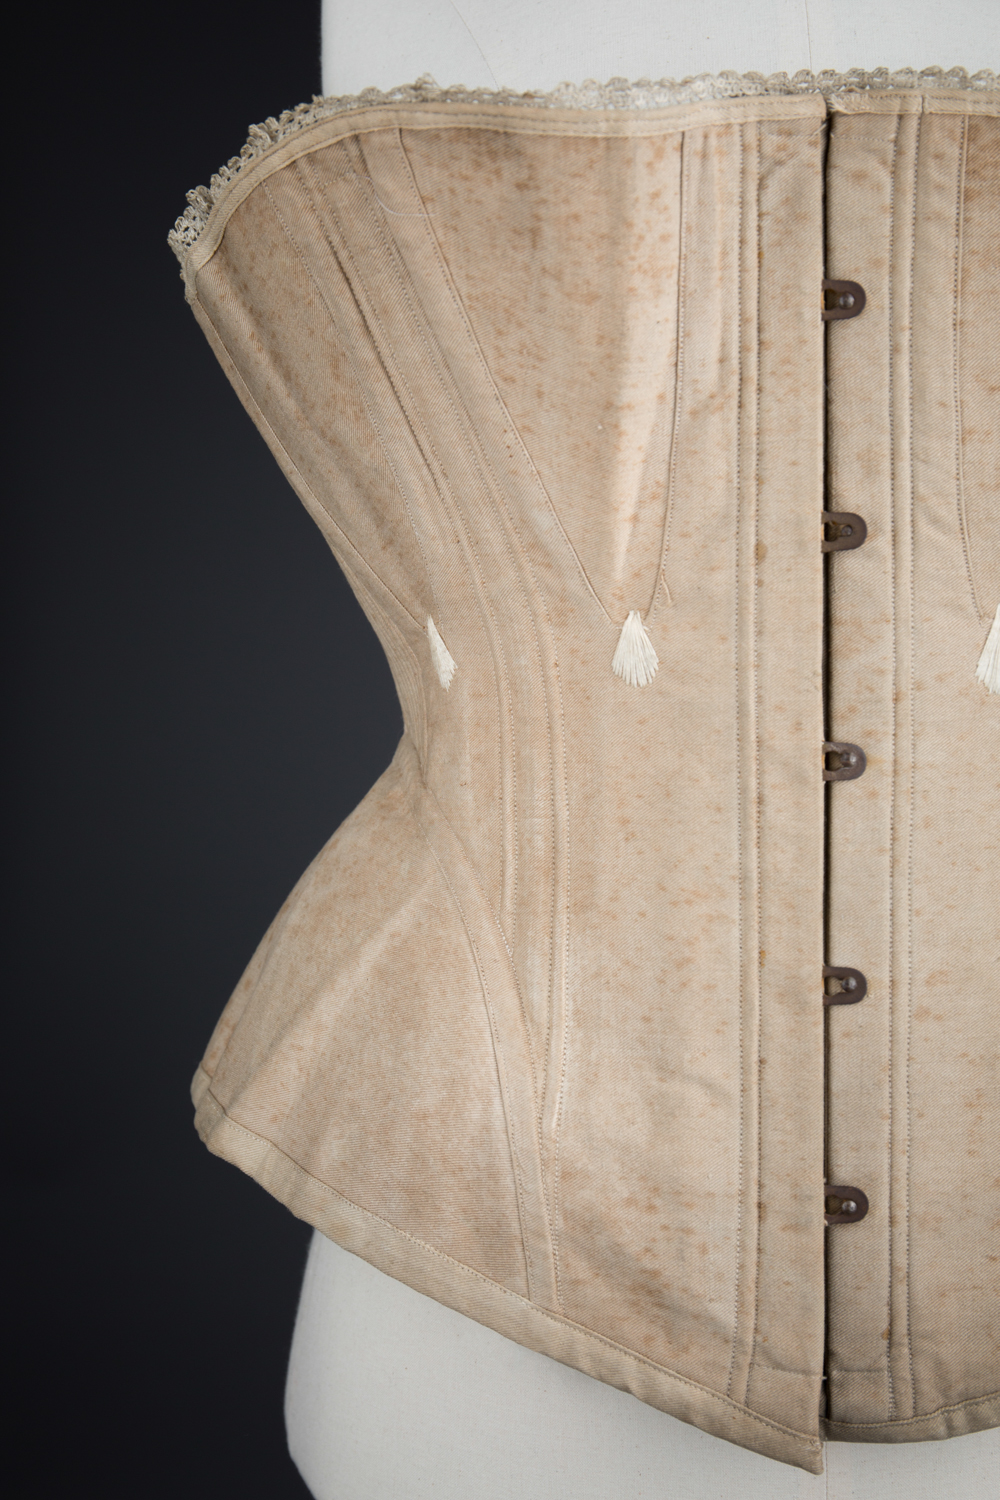 Ecru Cotton Twill Corset With Gores & White Flossing Embroidery, c. 1870s, Great Britain. The Underpinnings Museum. Photography by Tigz Rice.